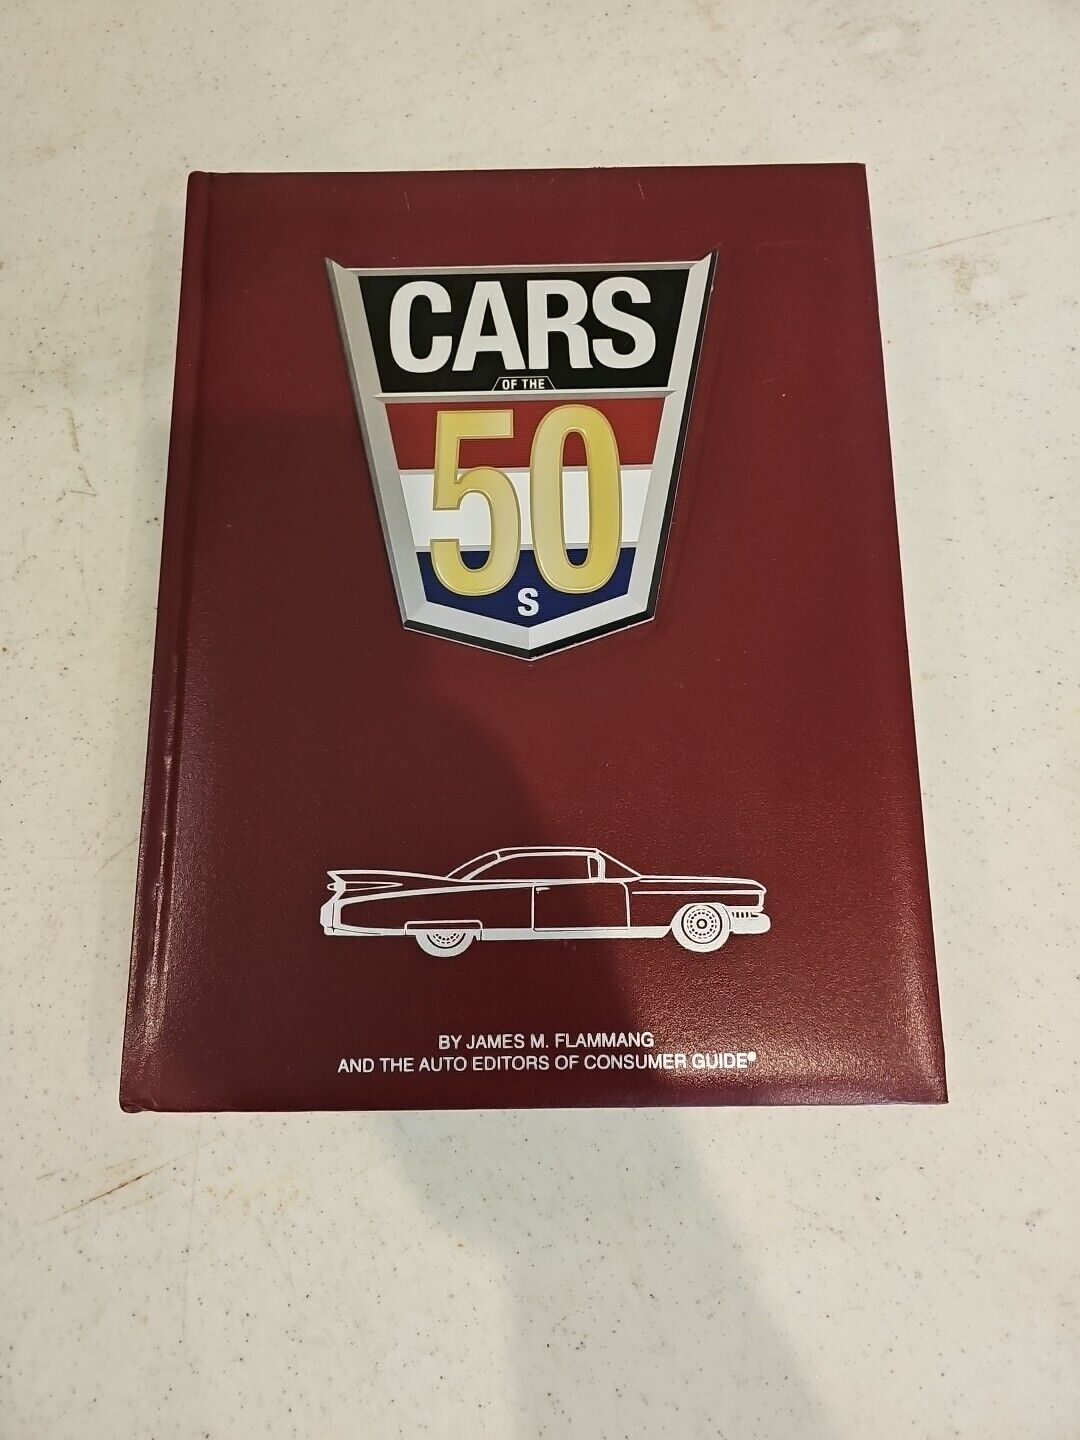 Cars of the 50\'s by James M. Flammang Hard Cover Book Classic Cars & Automobiles